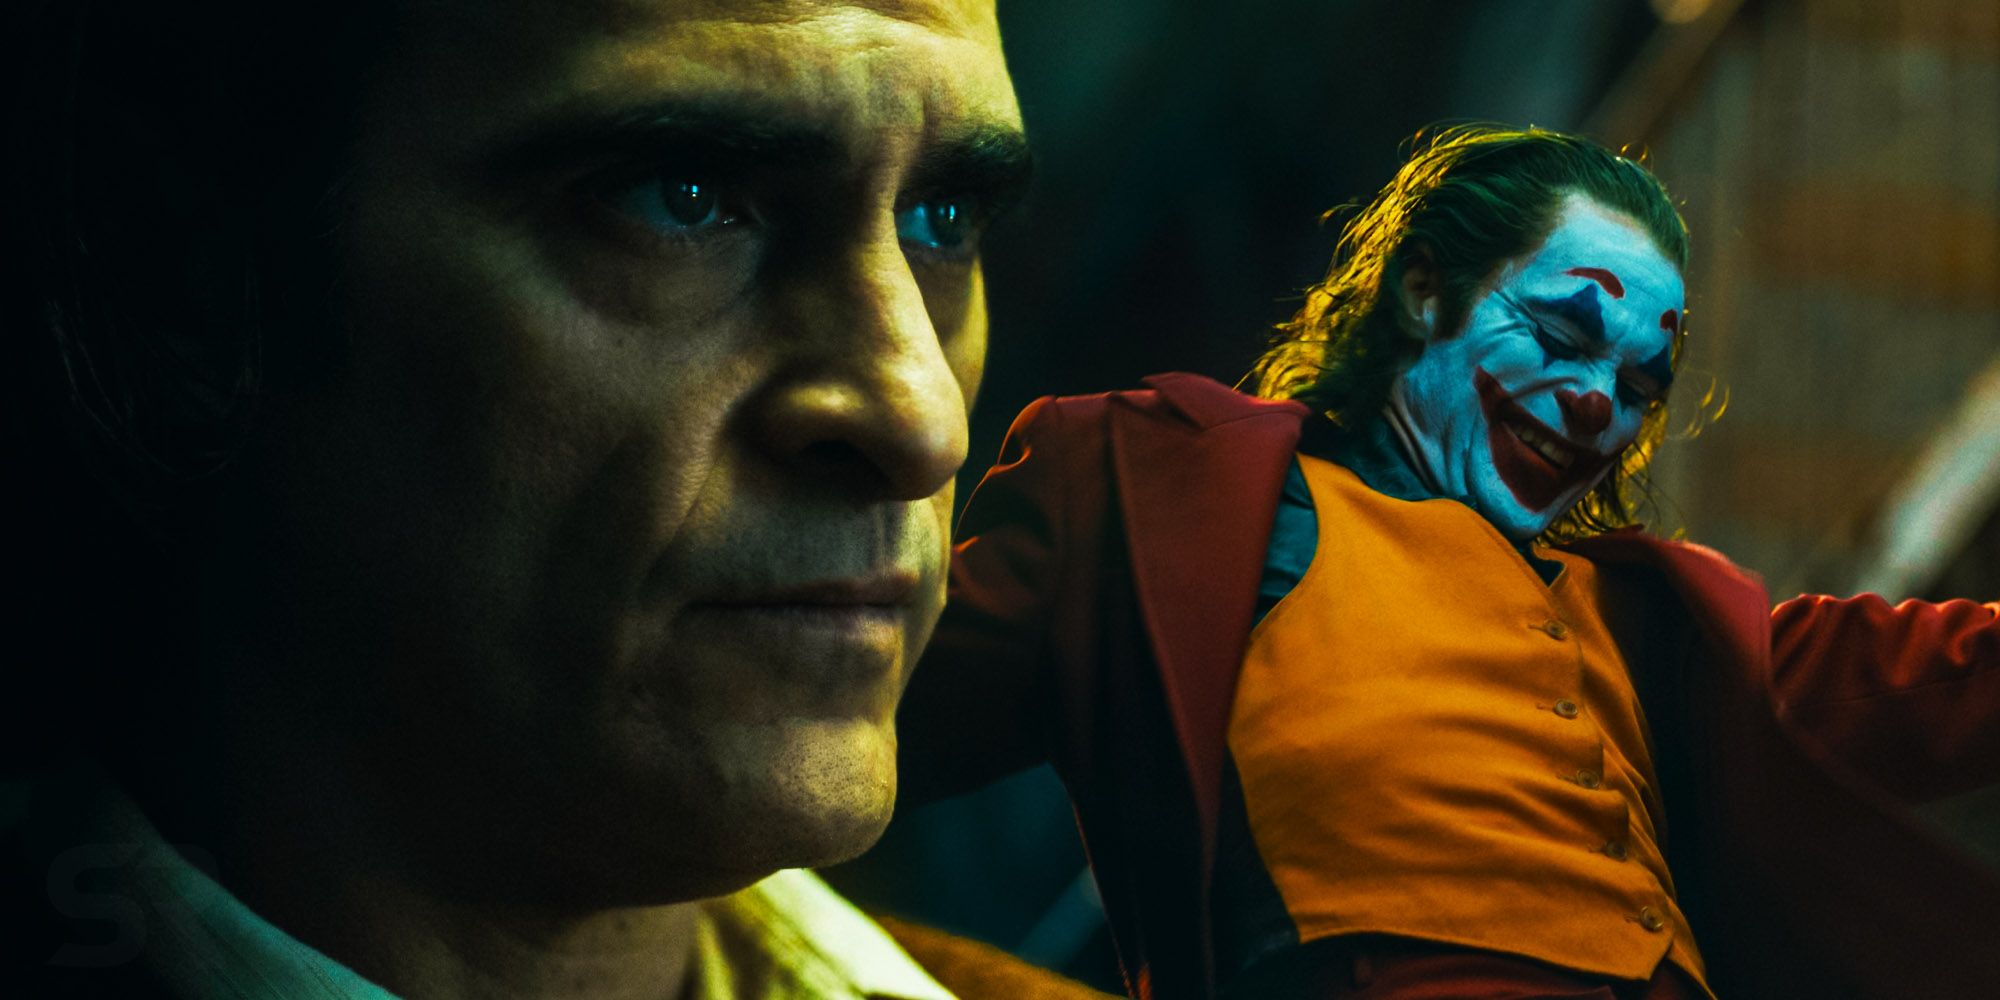 Split image of Joaquin Phoenix as Arthur Fleck in and out of Joker makeup.